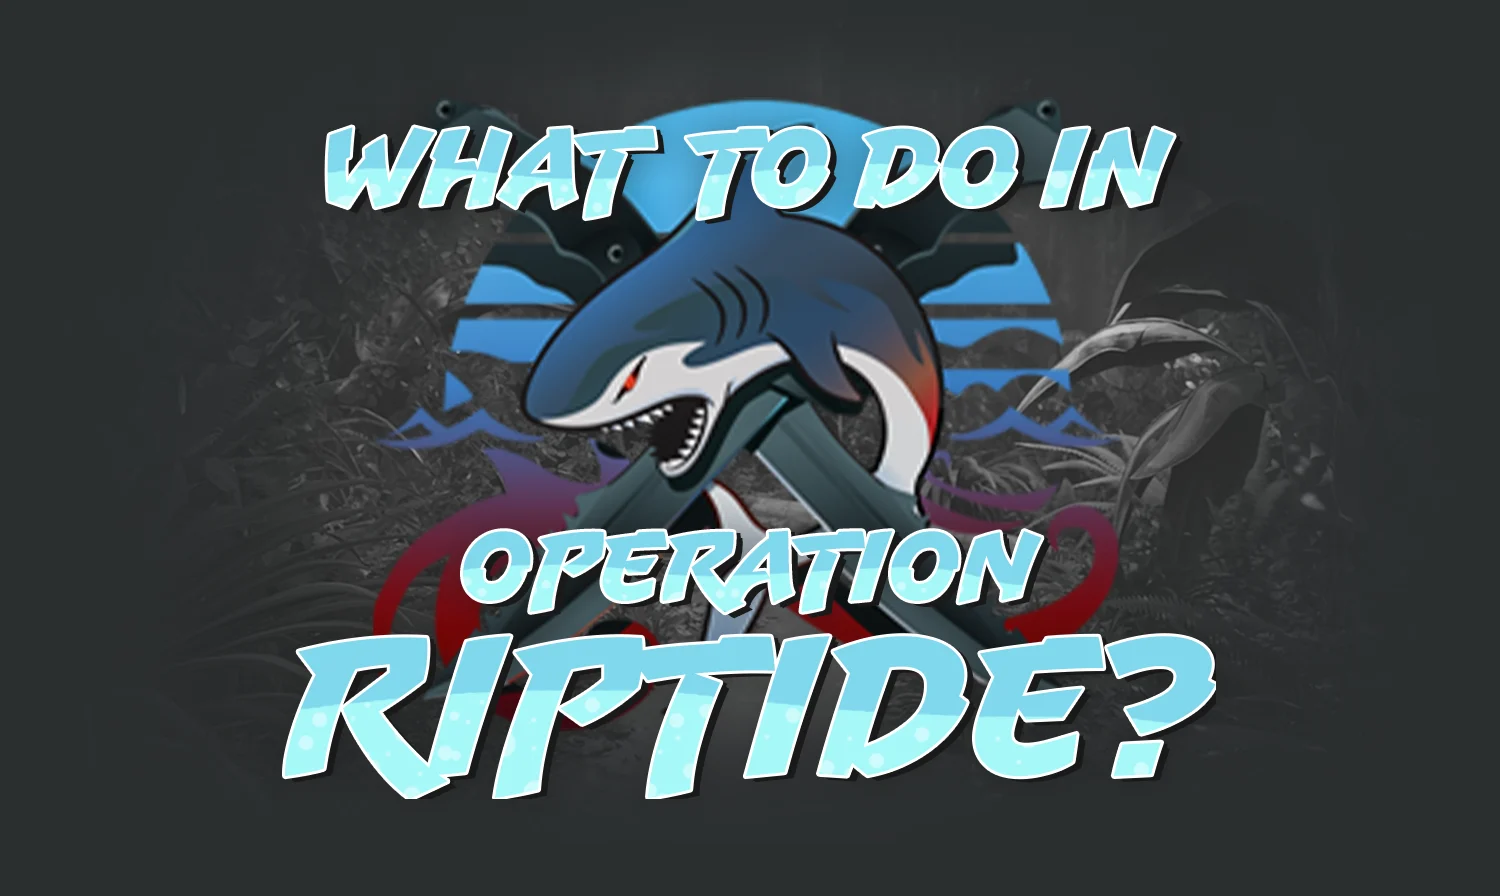 What Can You Do in Operation Riptide?